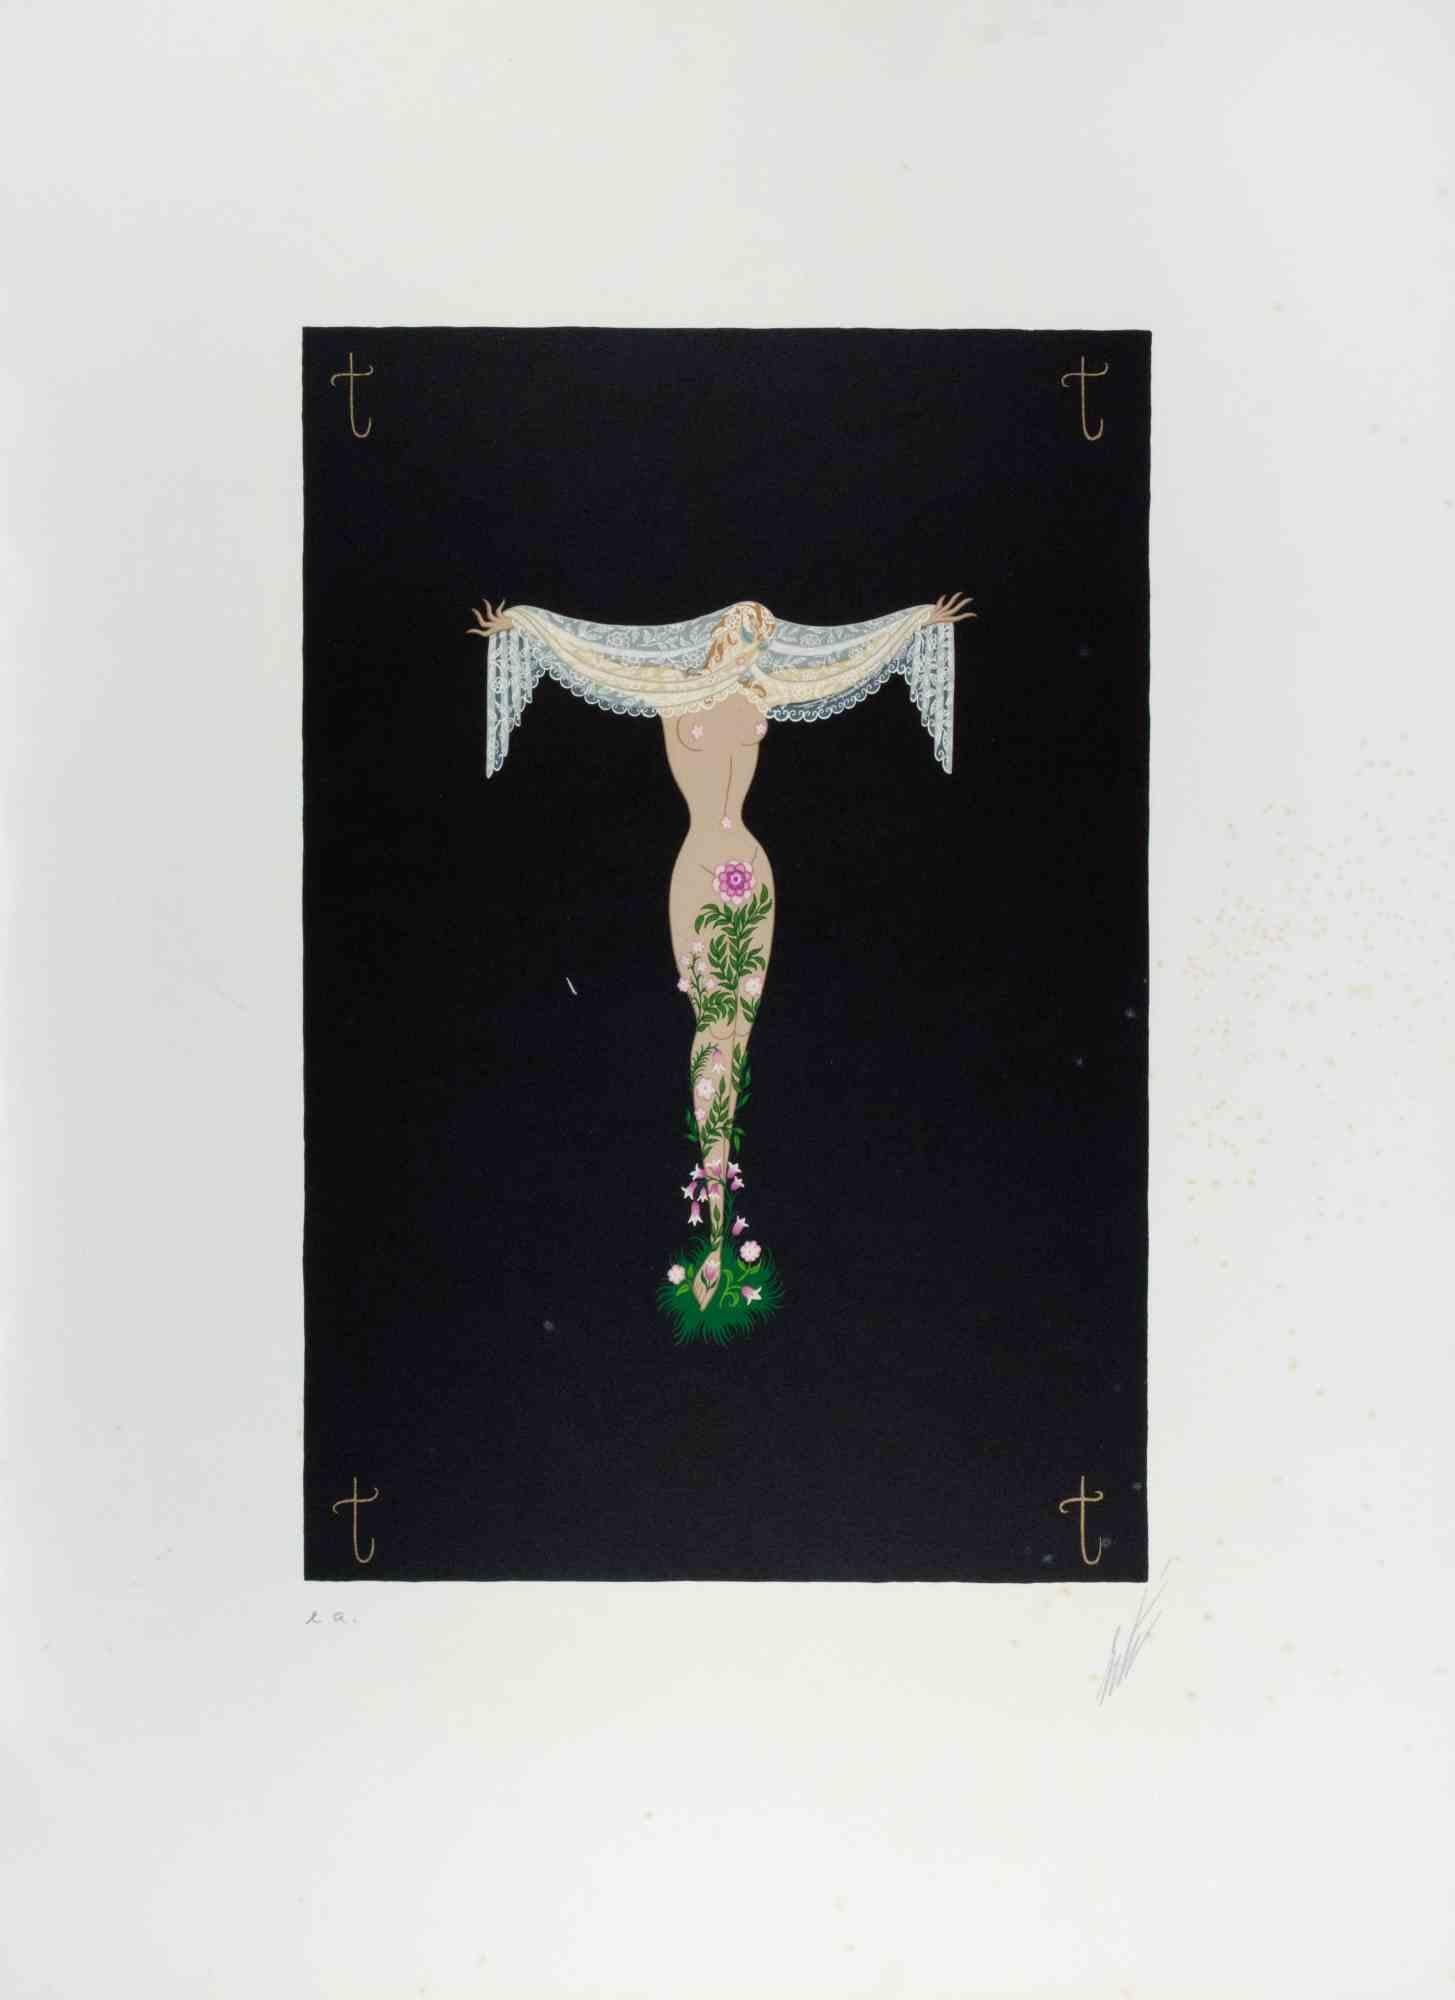 Letter T - from the suite Letters of the Alphabet is a contemporary artwork realized by Erté (Romain de Tirtoff).

Lithograph and Screen Print.

The artwork is from the suite "Letters of the Alphabet", 1976.

Hand signed on the lower margin. Artist